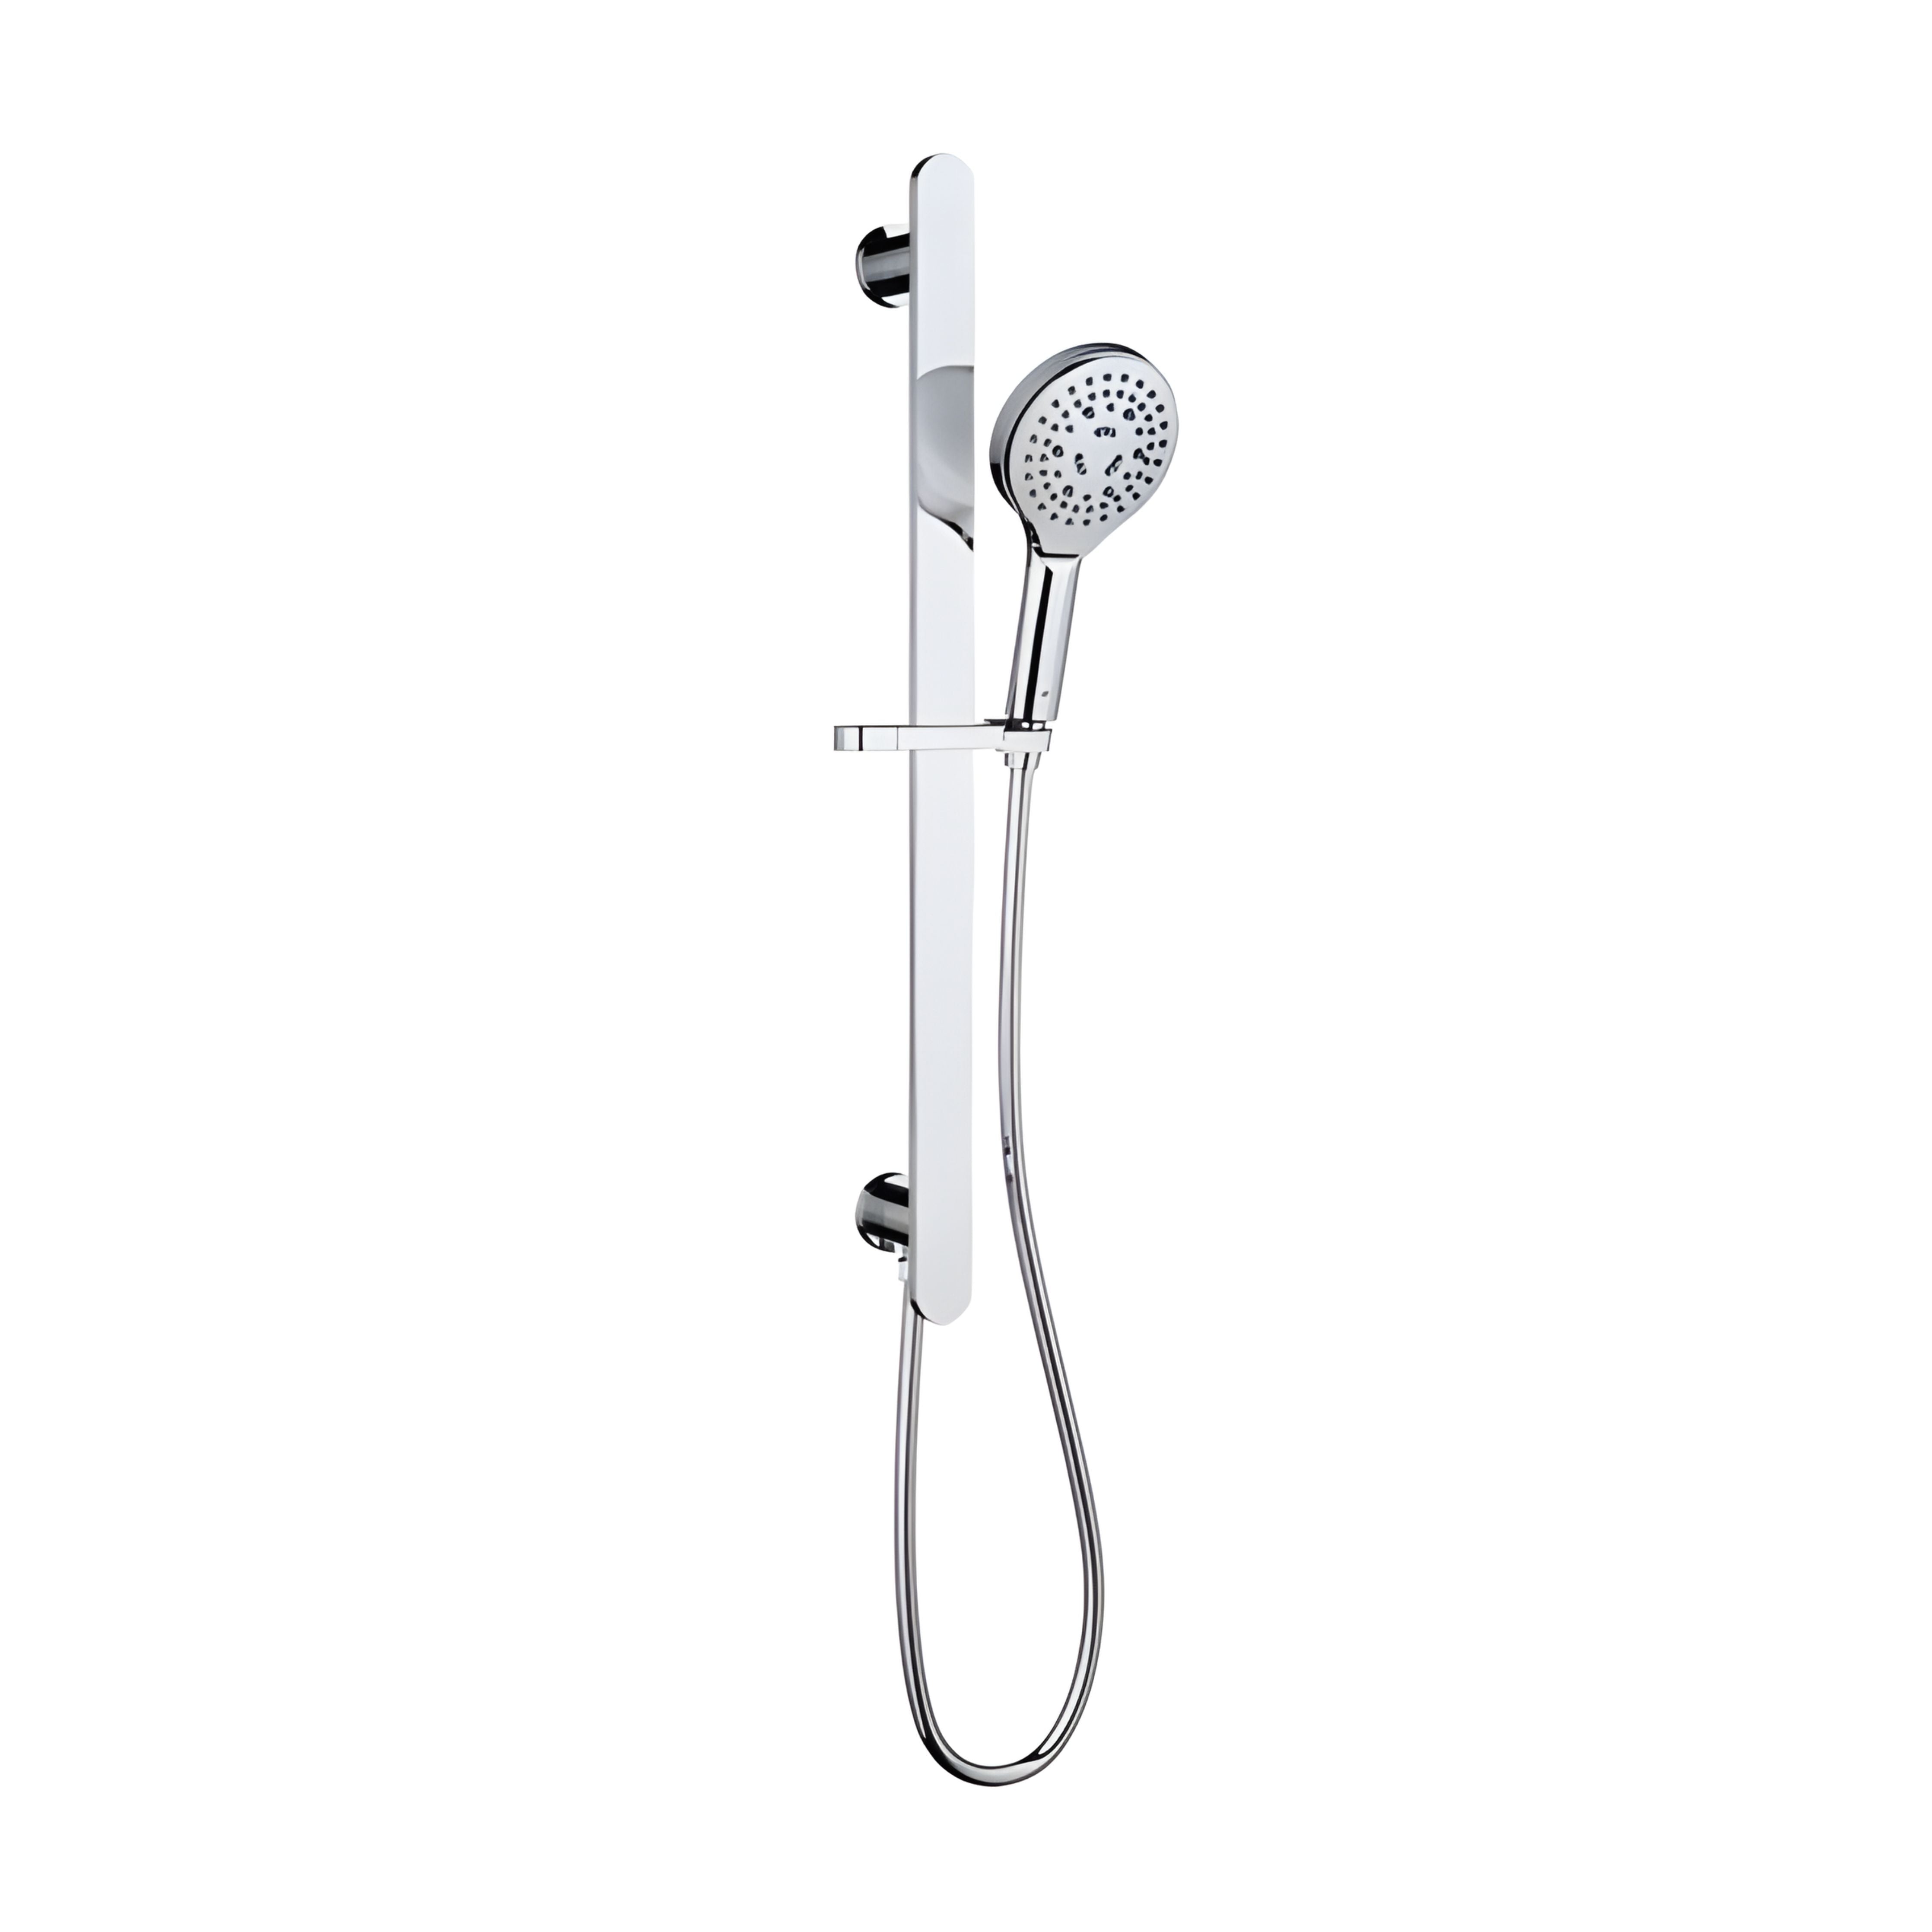 IKON KARA RAIL SHOWER WITH INTEGRATED WATER INLET CHROME